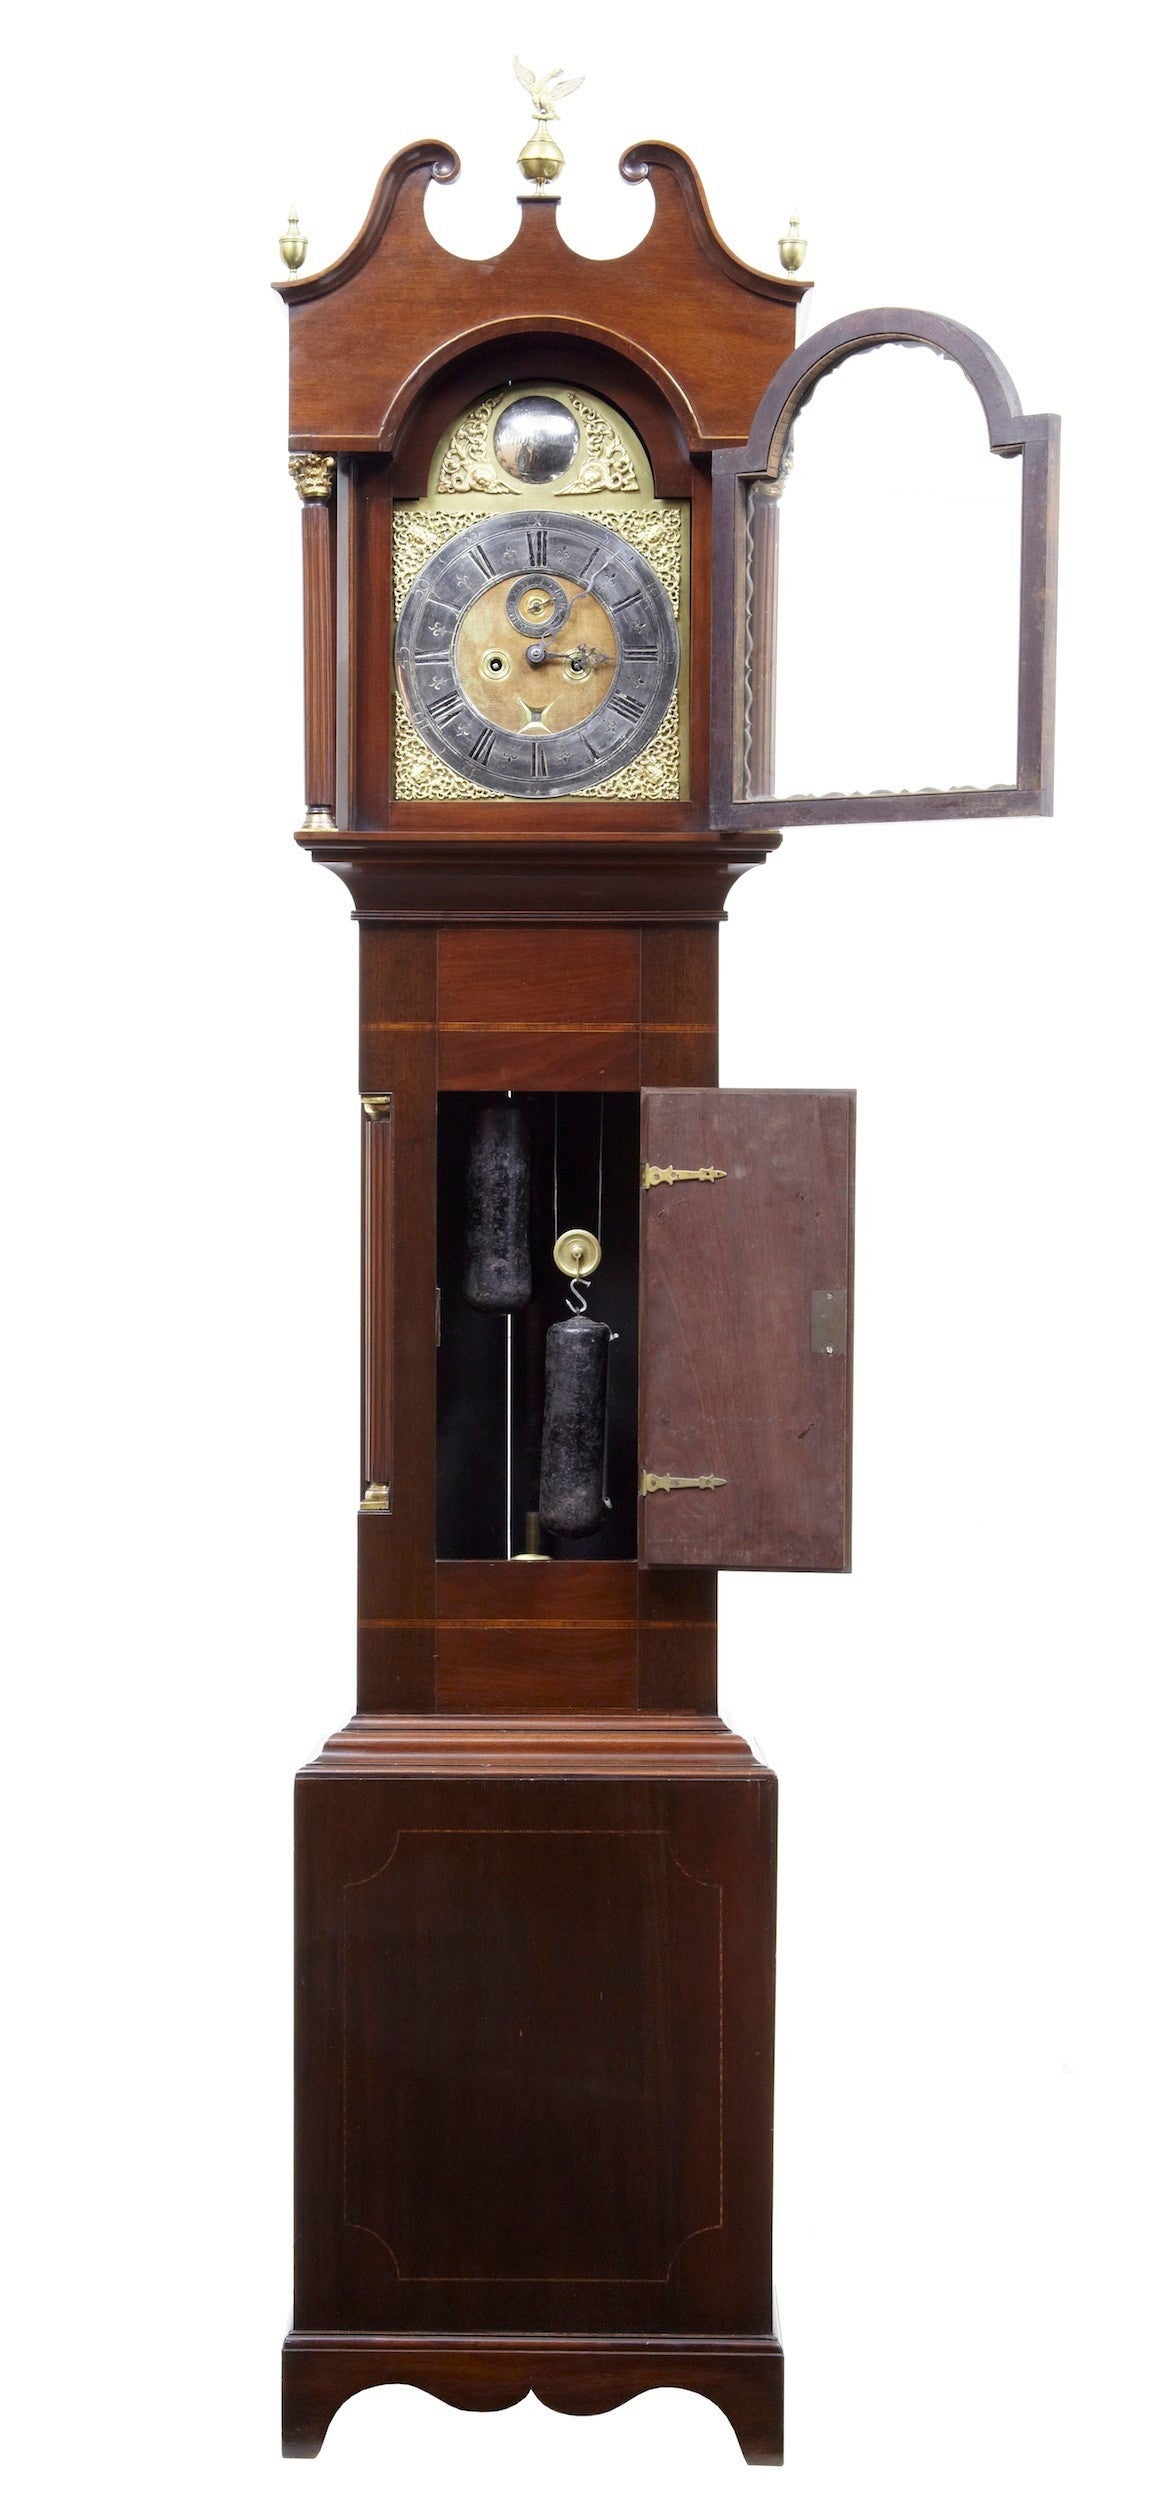 Excellent quality clock by renowned London maker William Underwood, circa 1760. 

Second hand dial and date. Original wind on arm. 

Stringing all round outer edge, featuring a inlaid urn on the door.

Working, but we recommend that this clock